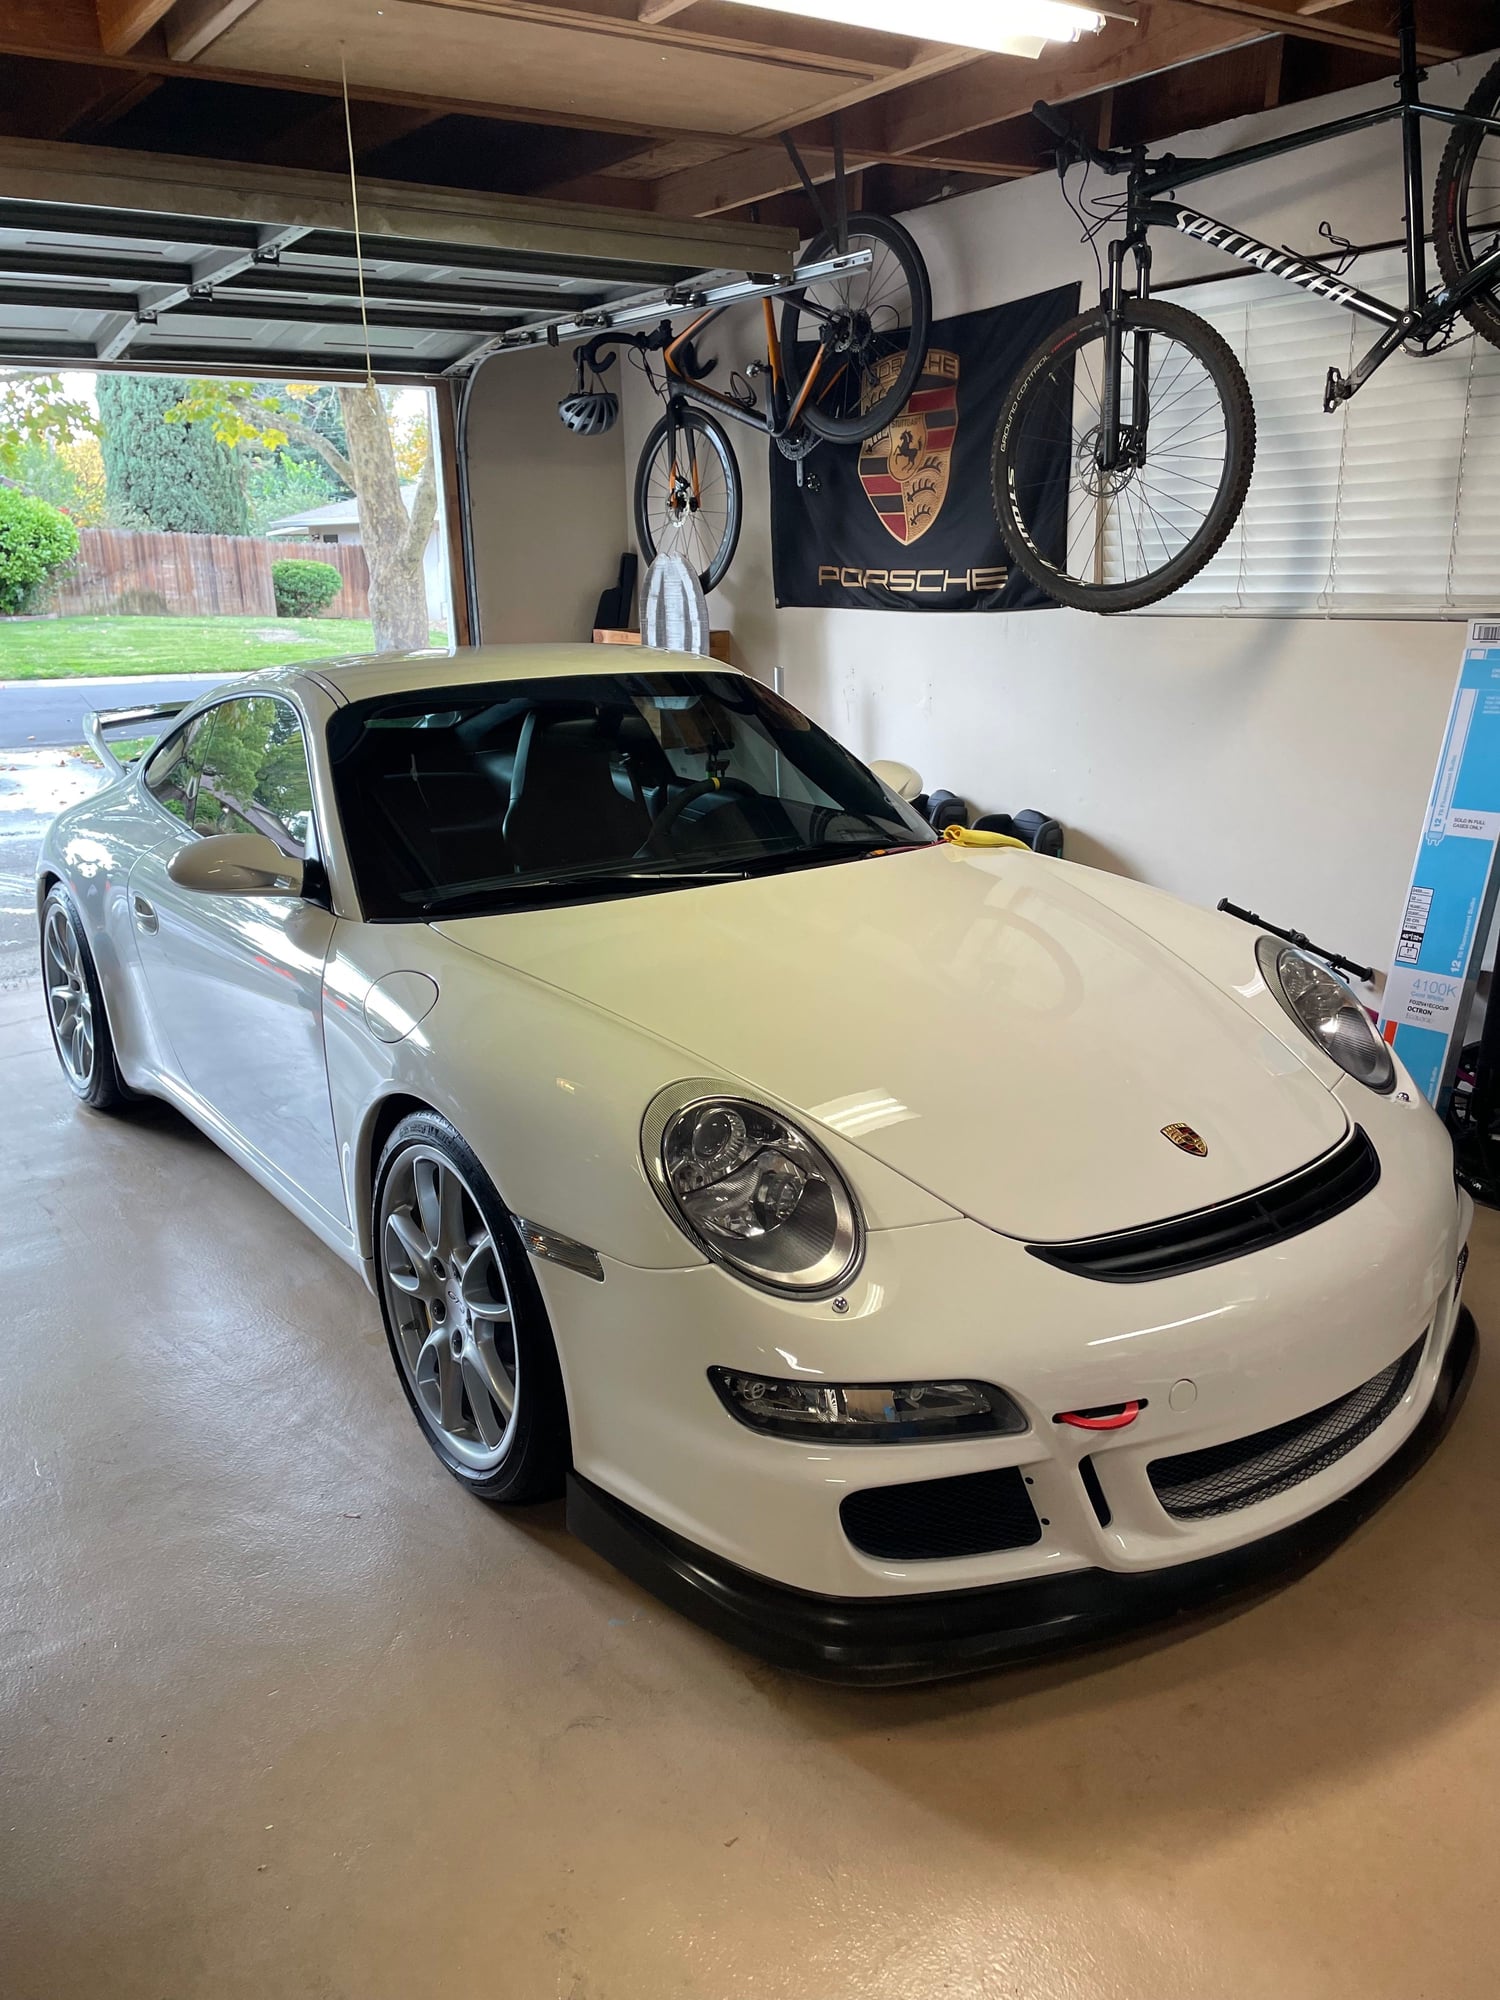 2007 Porsche GT3 - Drivers wanted! 997.1 GT3 with 96k miles. - Used - VIN WP0AC29937S79231 - 96,000 Miles - 6 cyl - 2WD - Manual - Coupe - White - Sacramento, CA 95864, United States